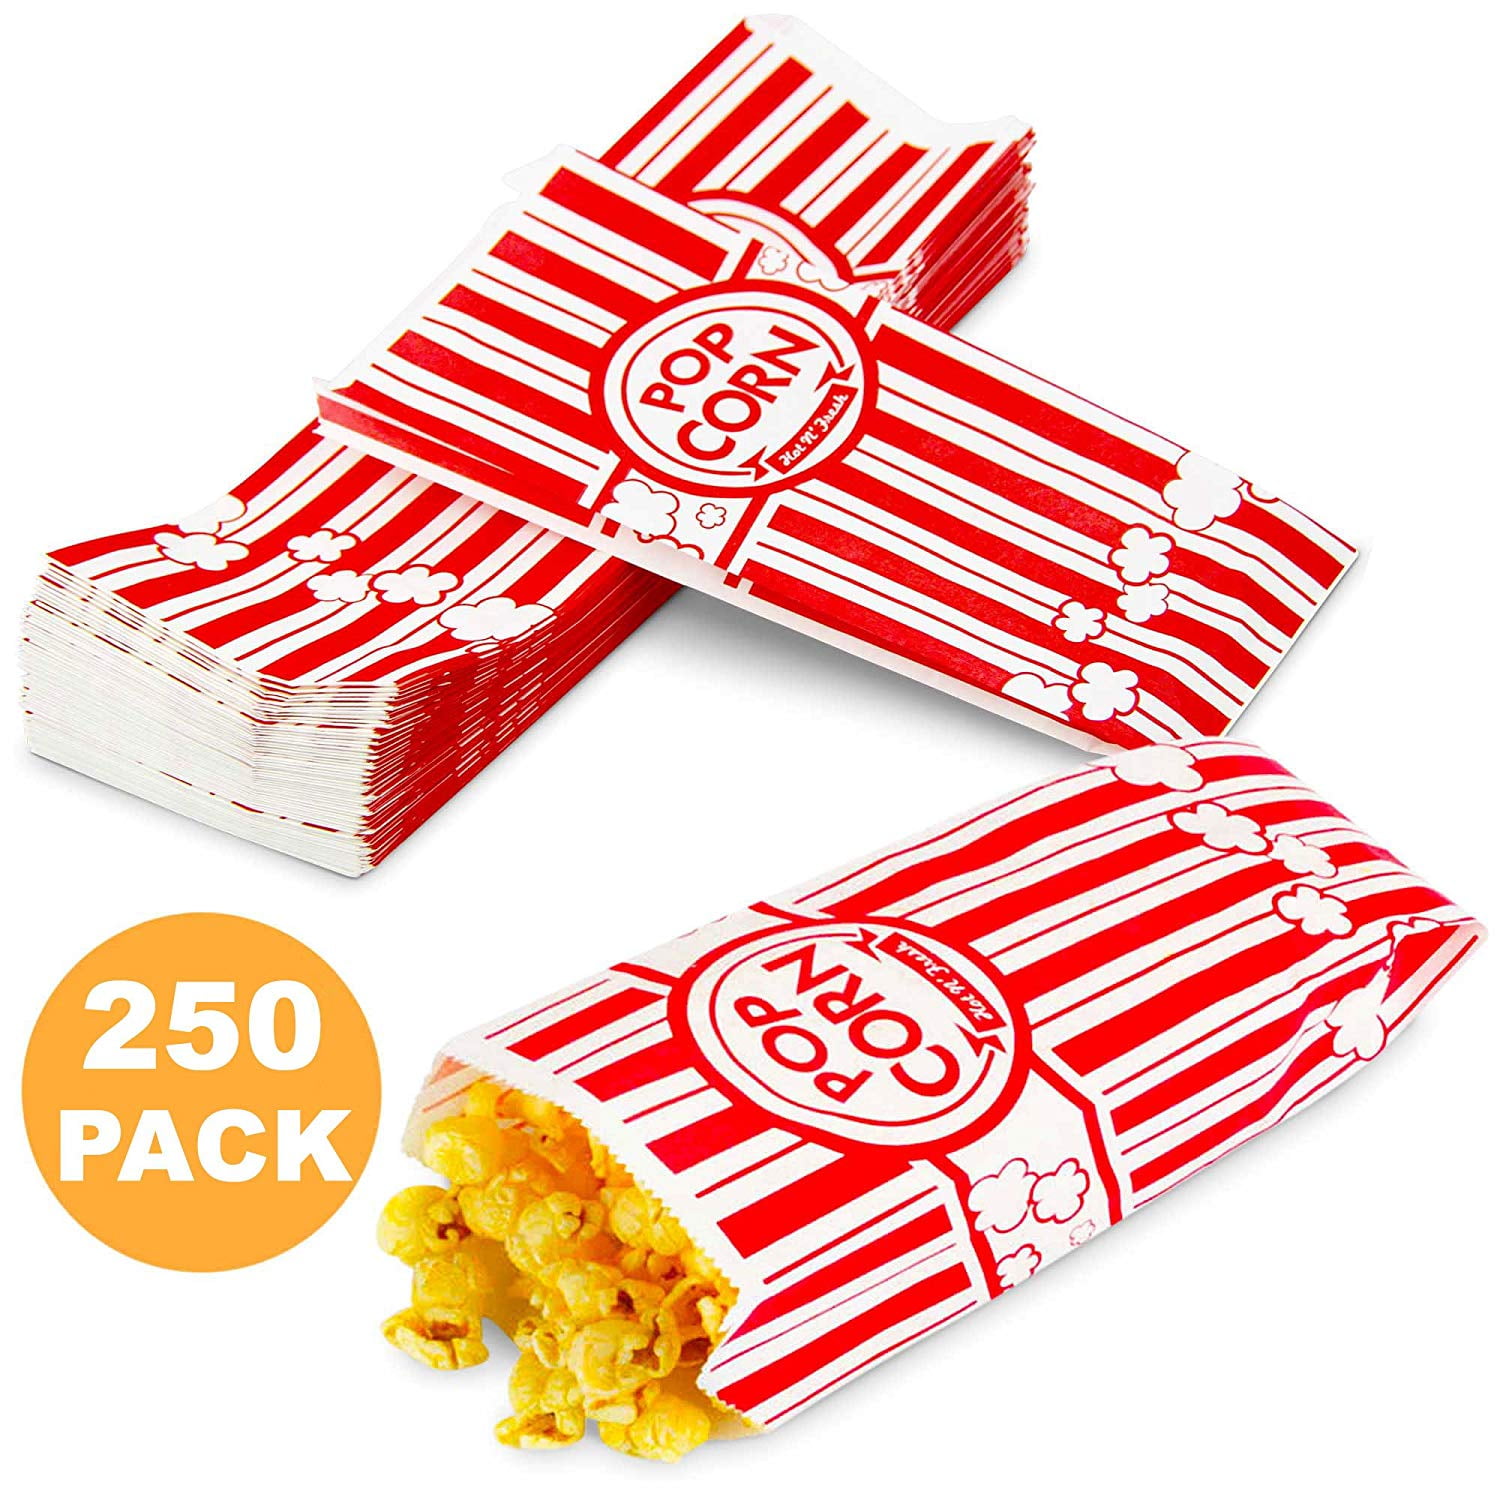 Theaters 100 Pack - Vintage Striped Popcorn Containers Eco friendly Disposable Popcorn Bags Stock Your Home Kraft Popcorn Bags Parties,Concession Stands Recyclable Popcorn Bags For Movie Night 